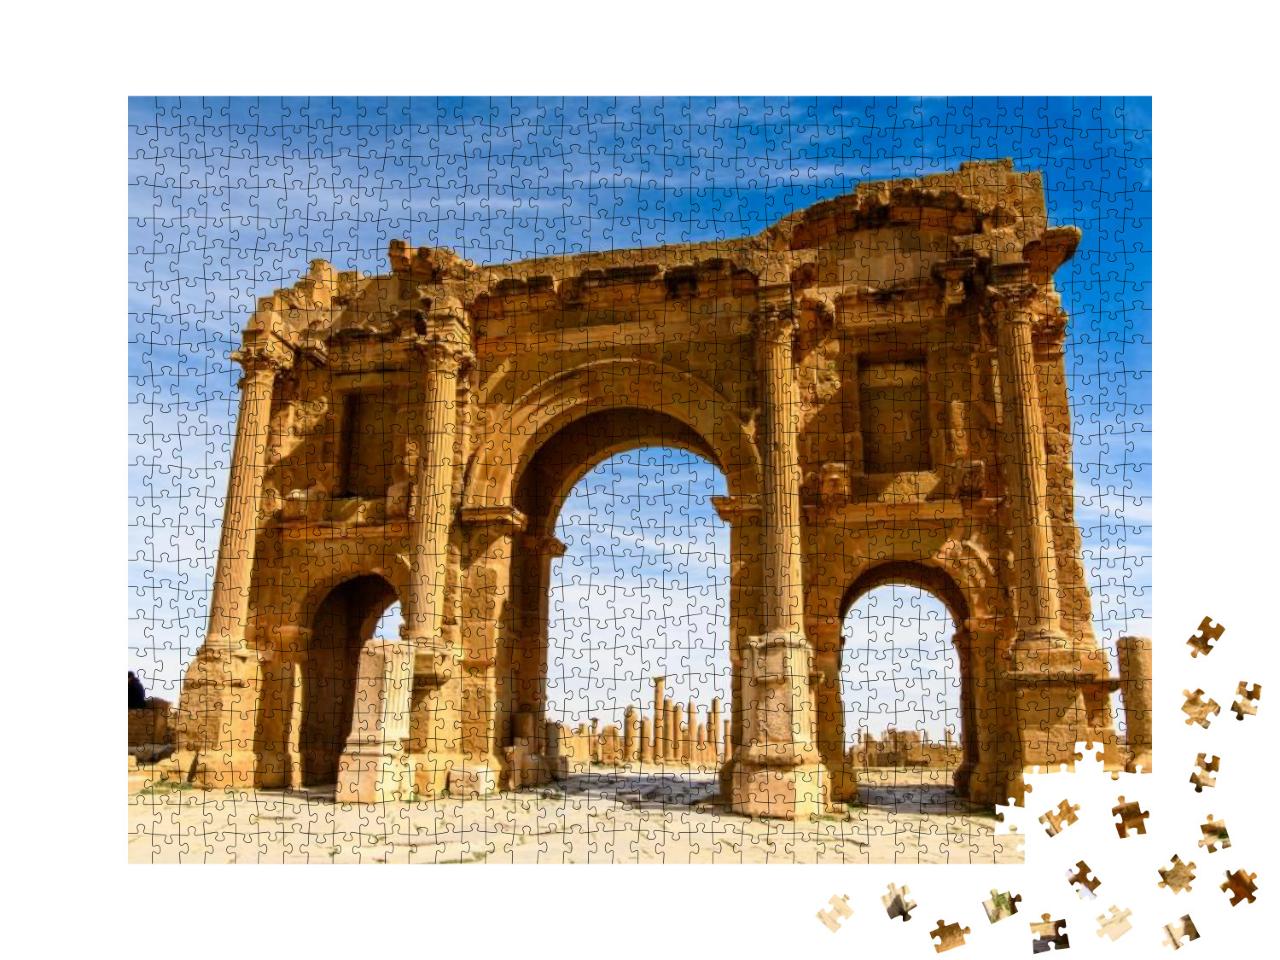 Timgad, a Roman-Berber City in the Aures Mountains of Alg... Jigsaw Puzzle with 1000 pieces